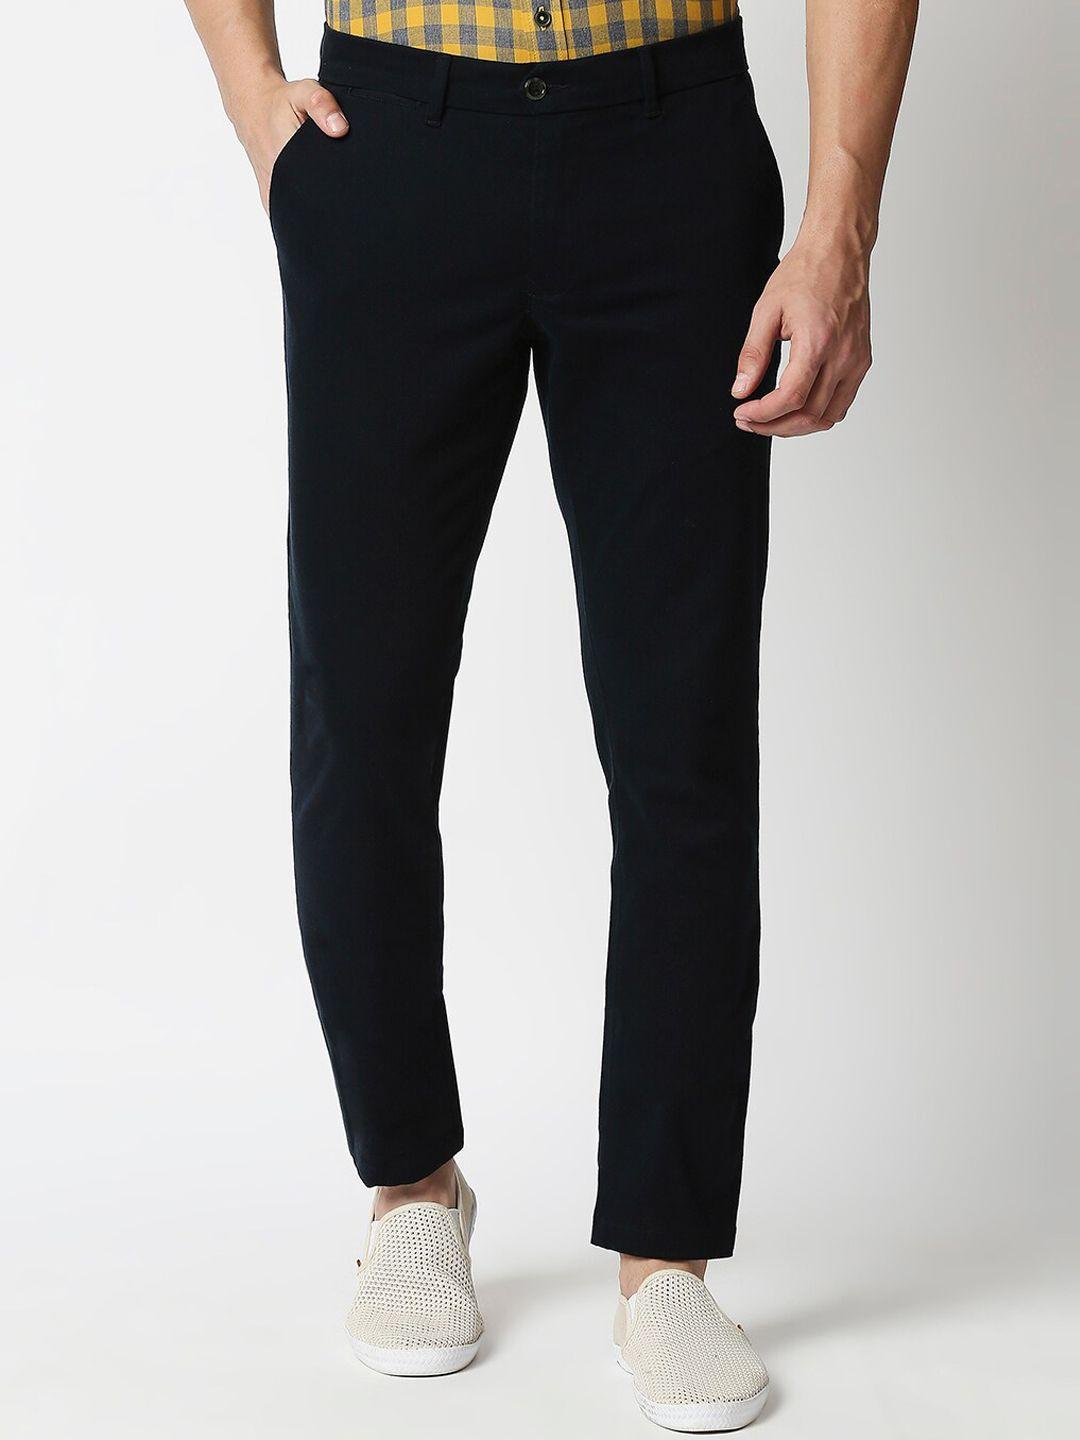 basics men navy blue tapered fit trousers